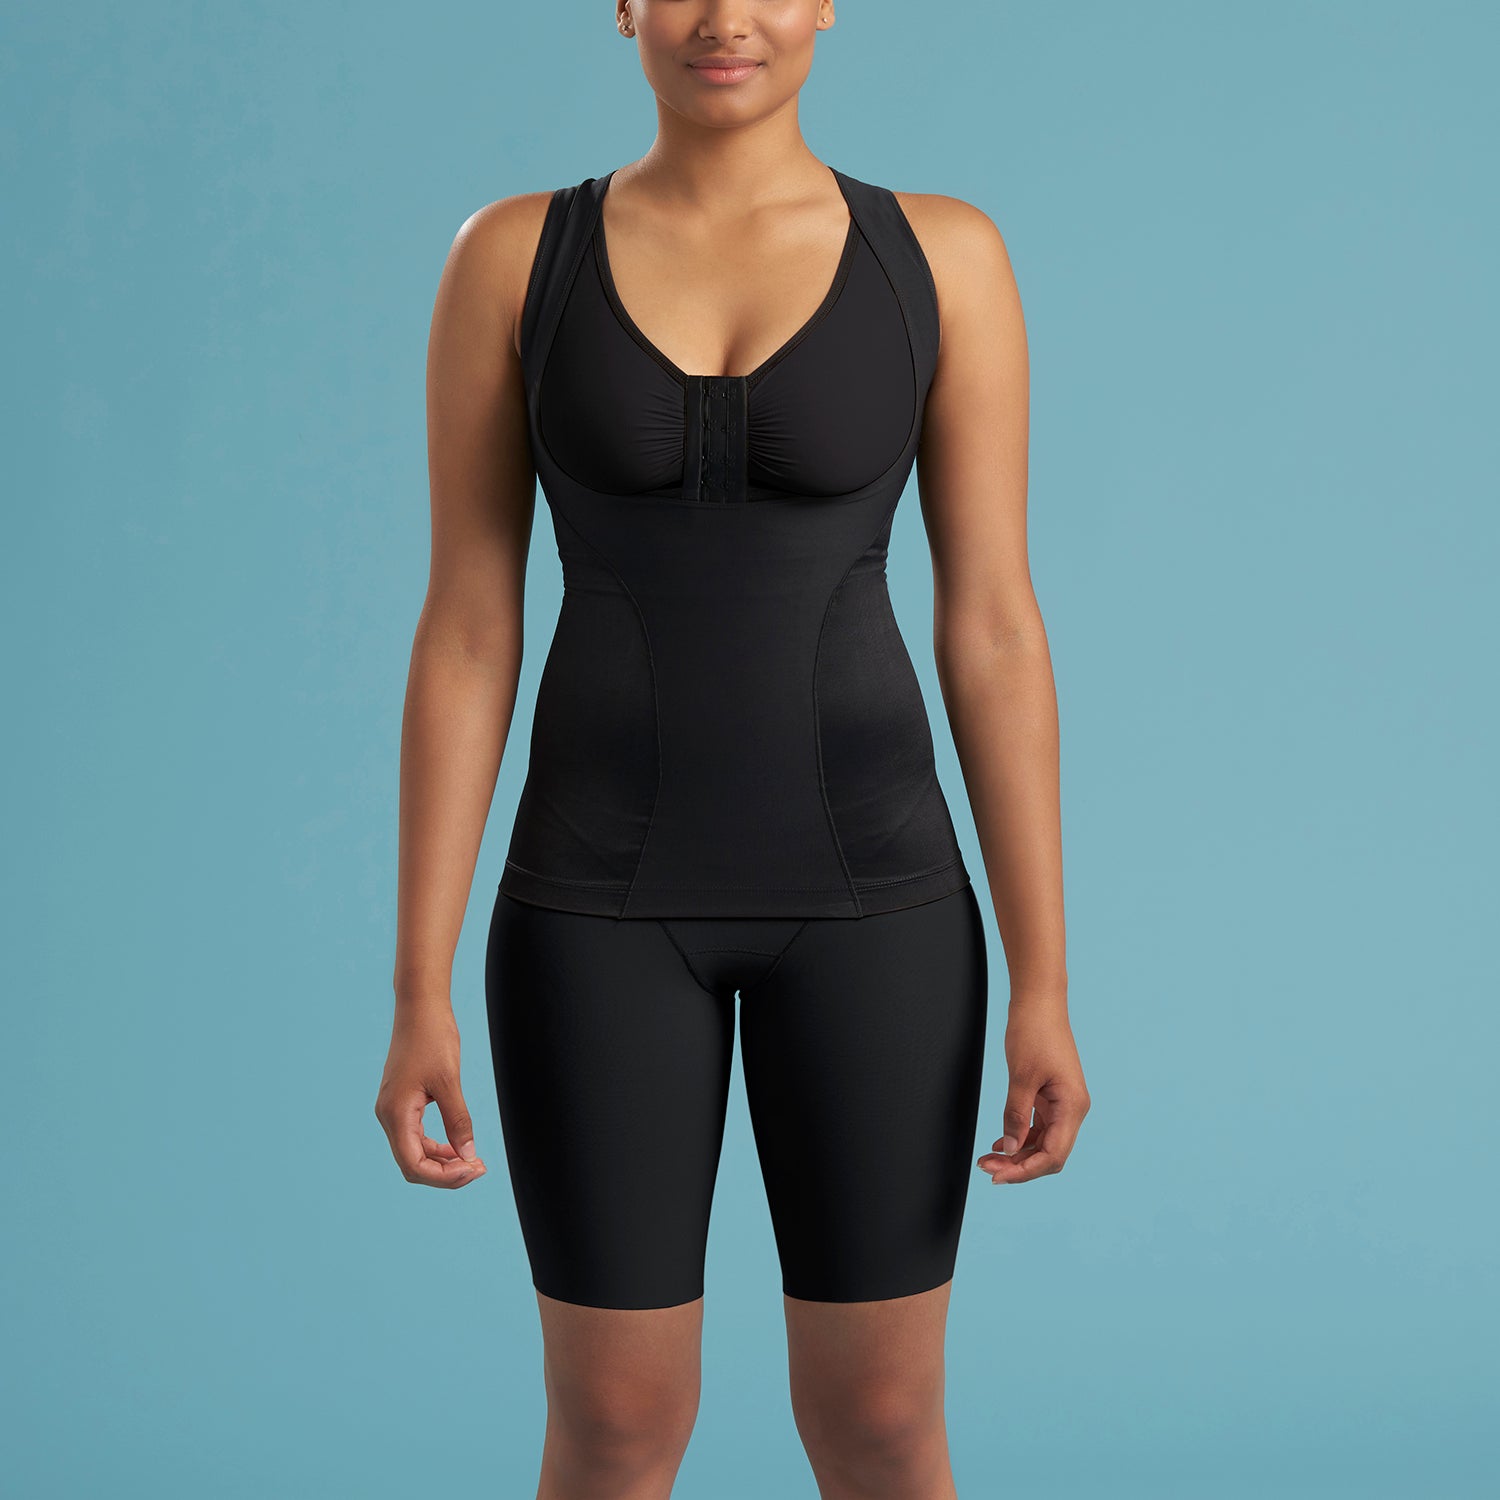 Best Shapewear for Women  Compression Garments for Women - The